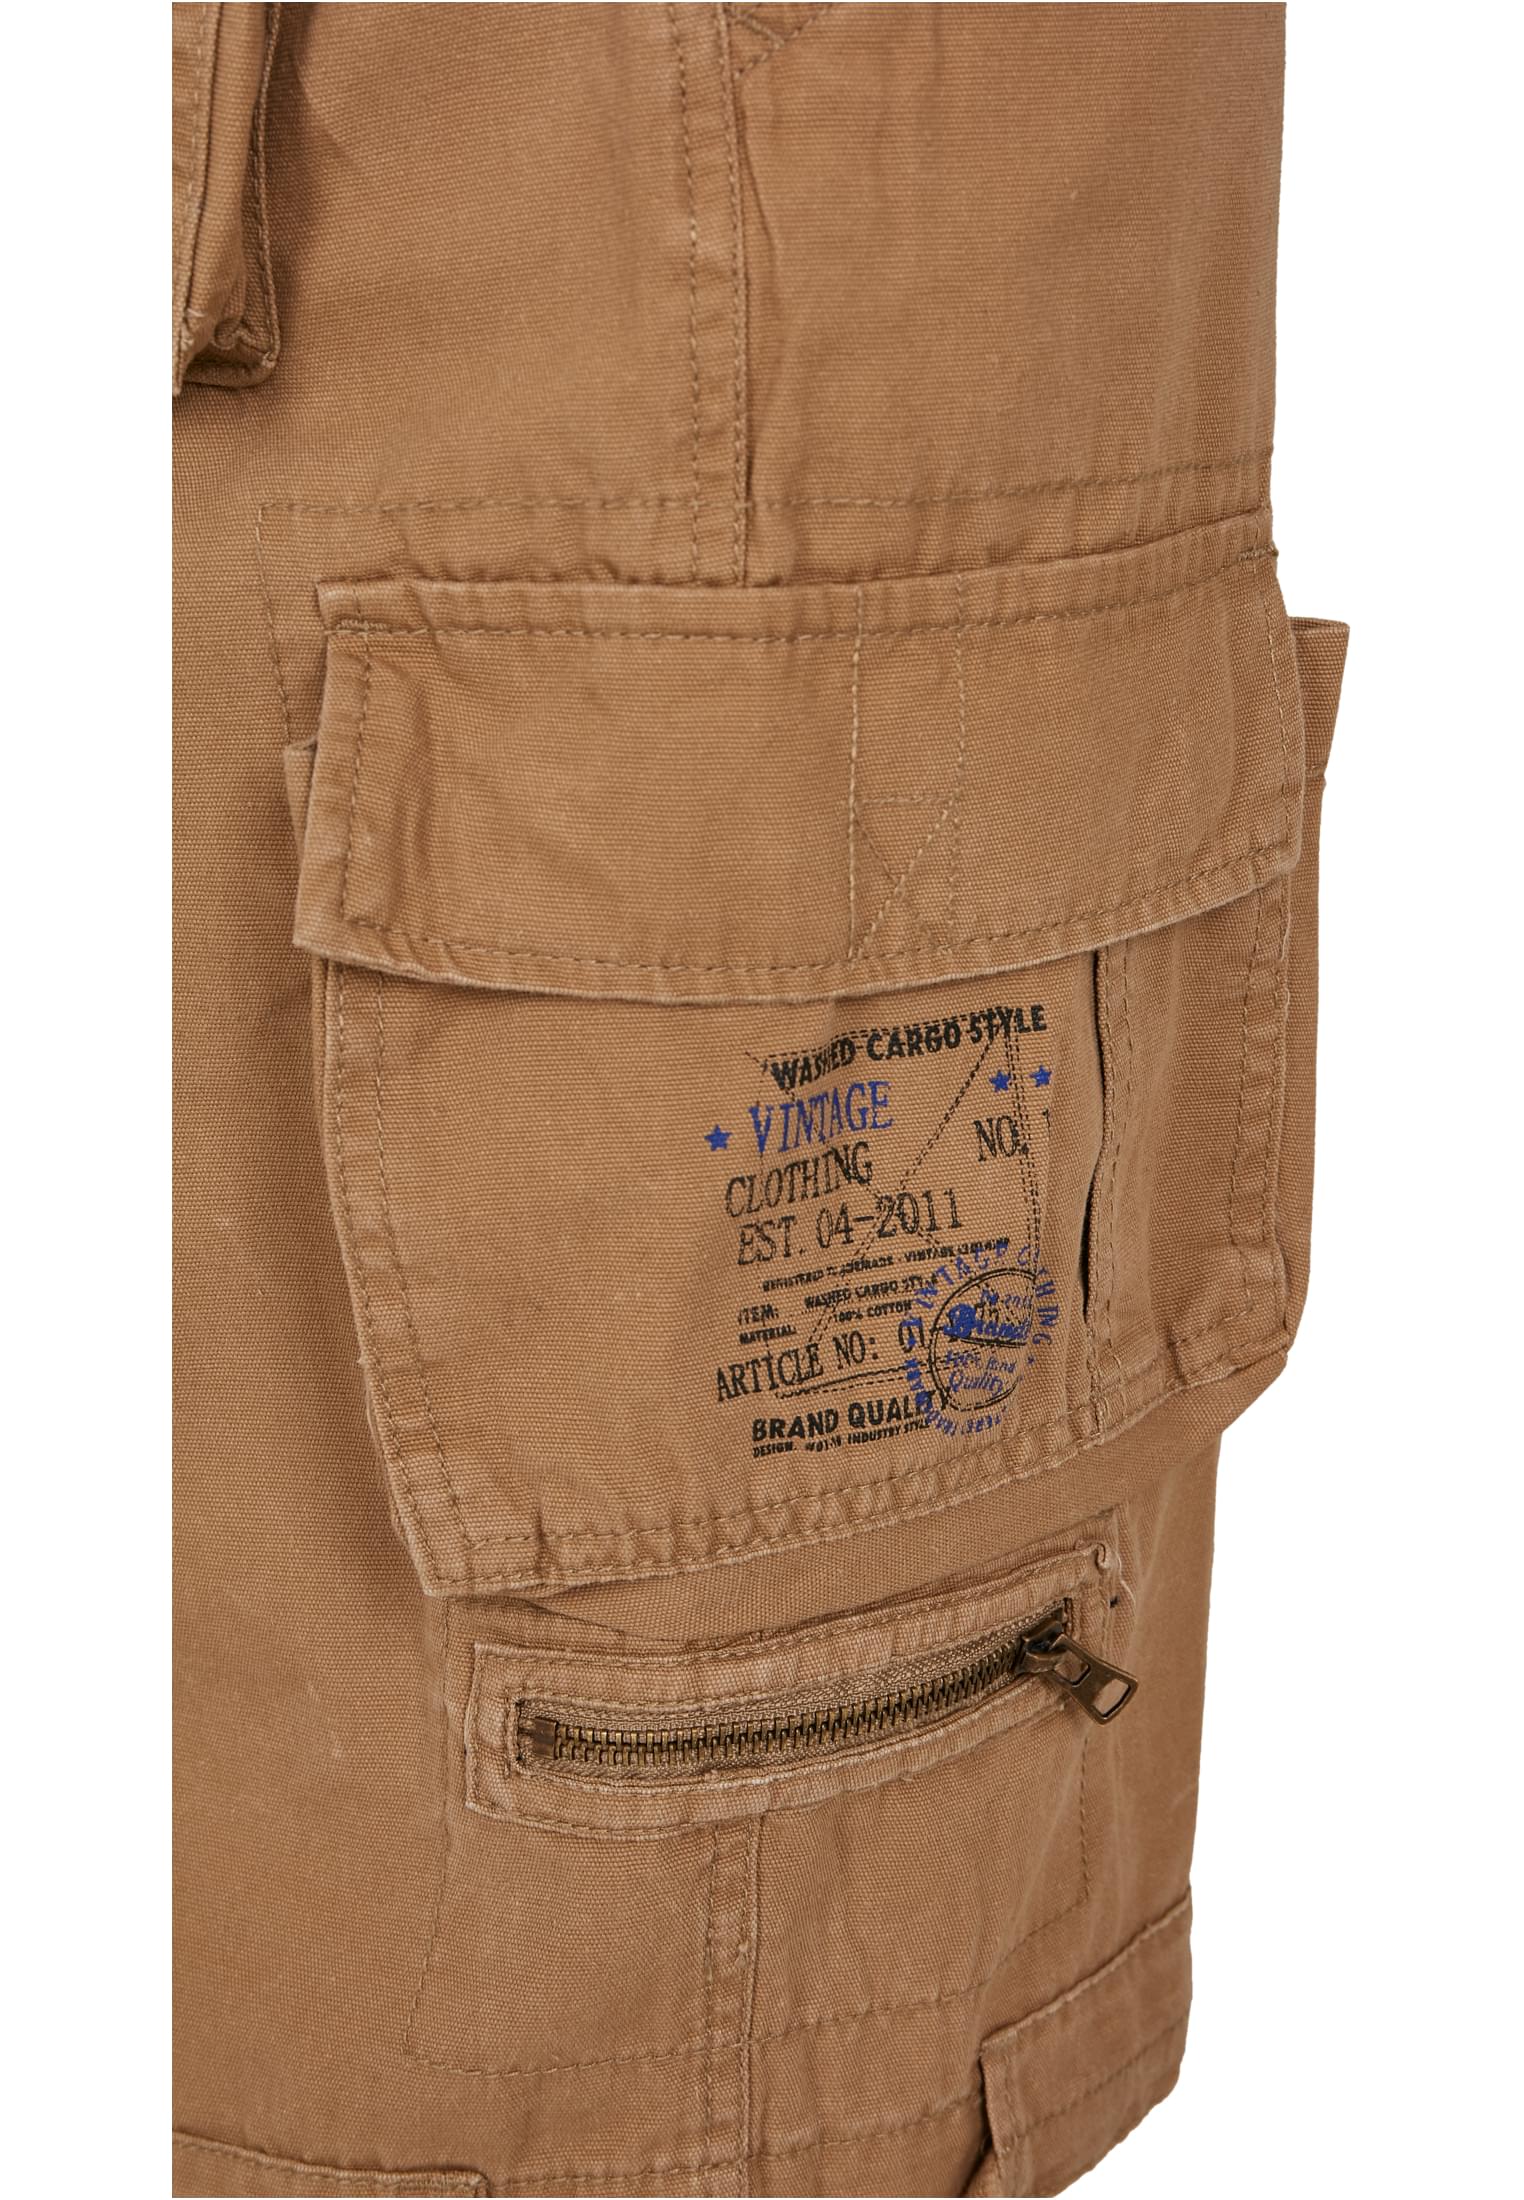 Shorts Savage Vintage Cargo Shorts in Farbe beige